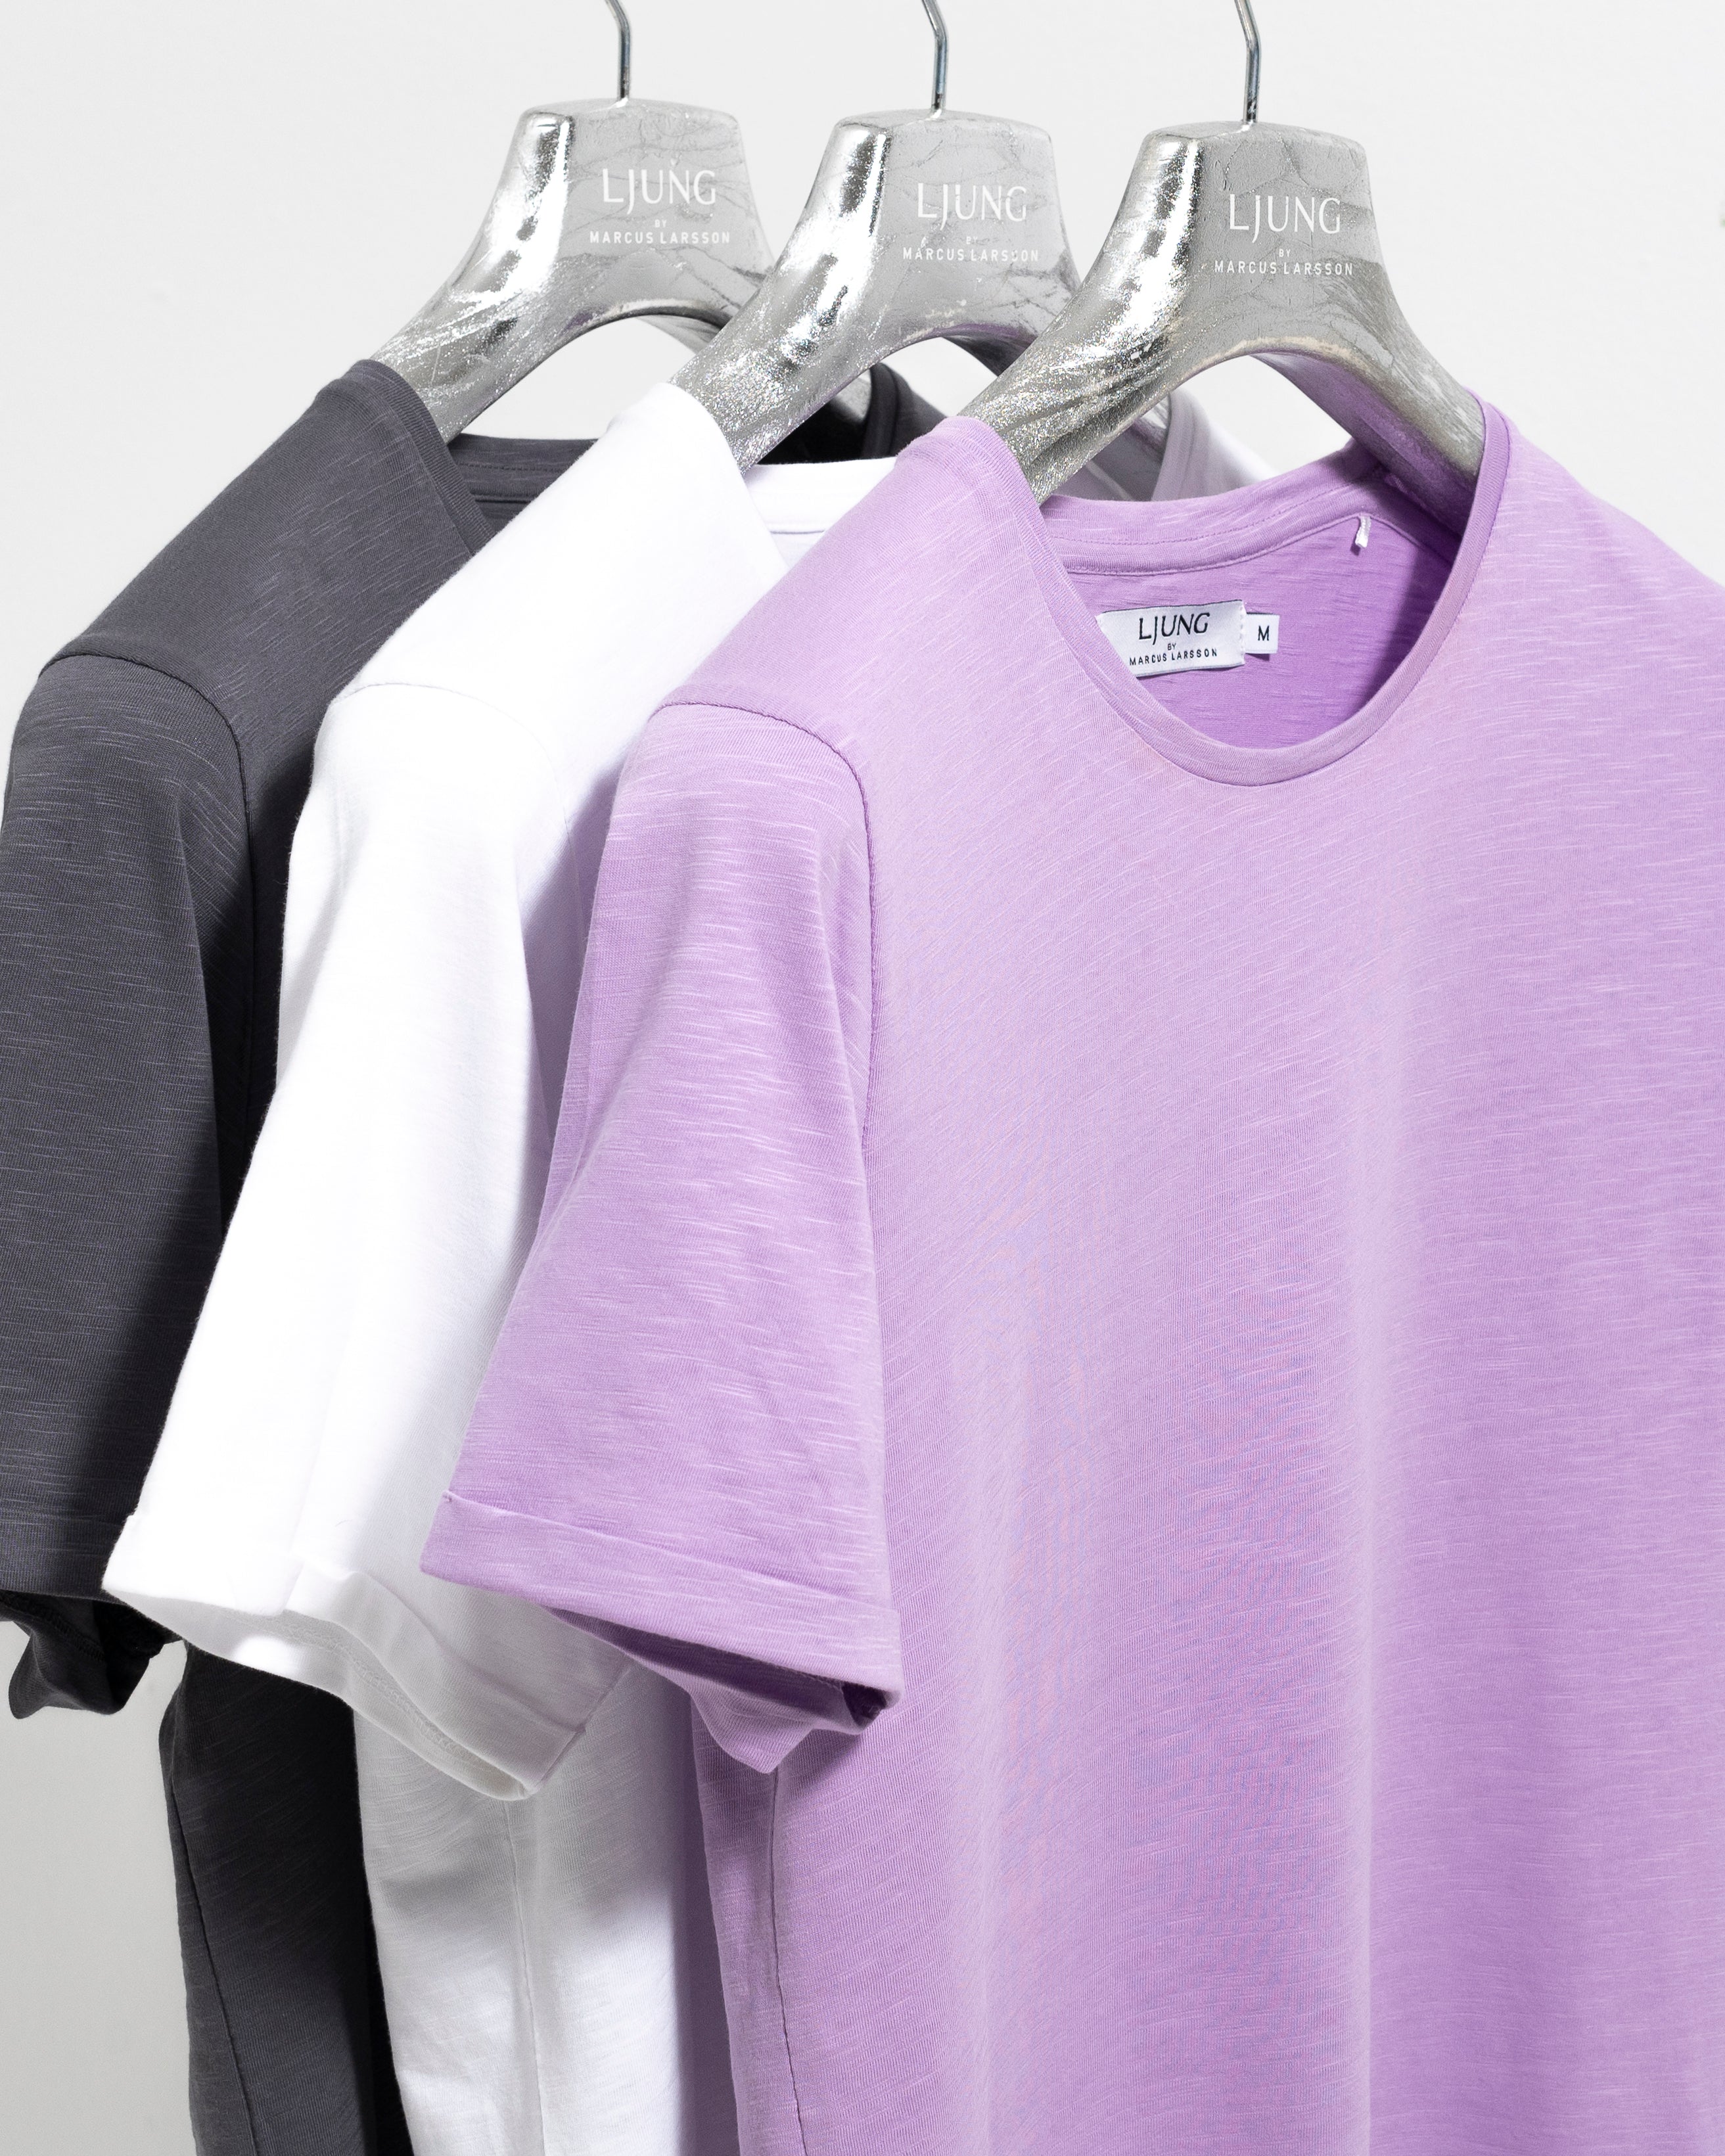 Core Tee 3 Pack - Gun Metal Grey/ White/ Dusty Orchid